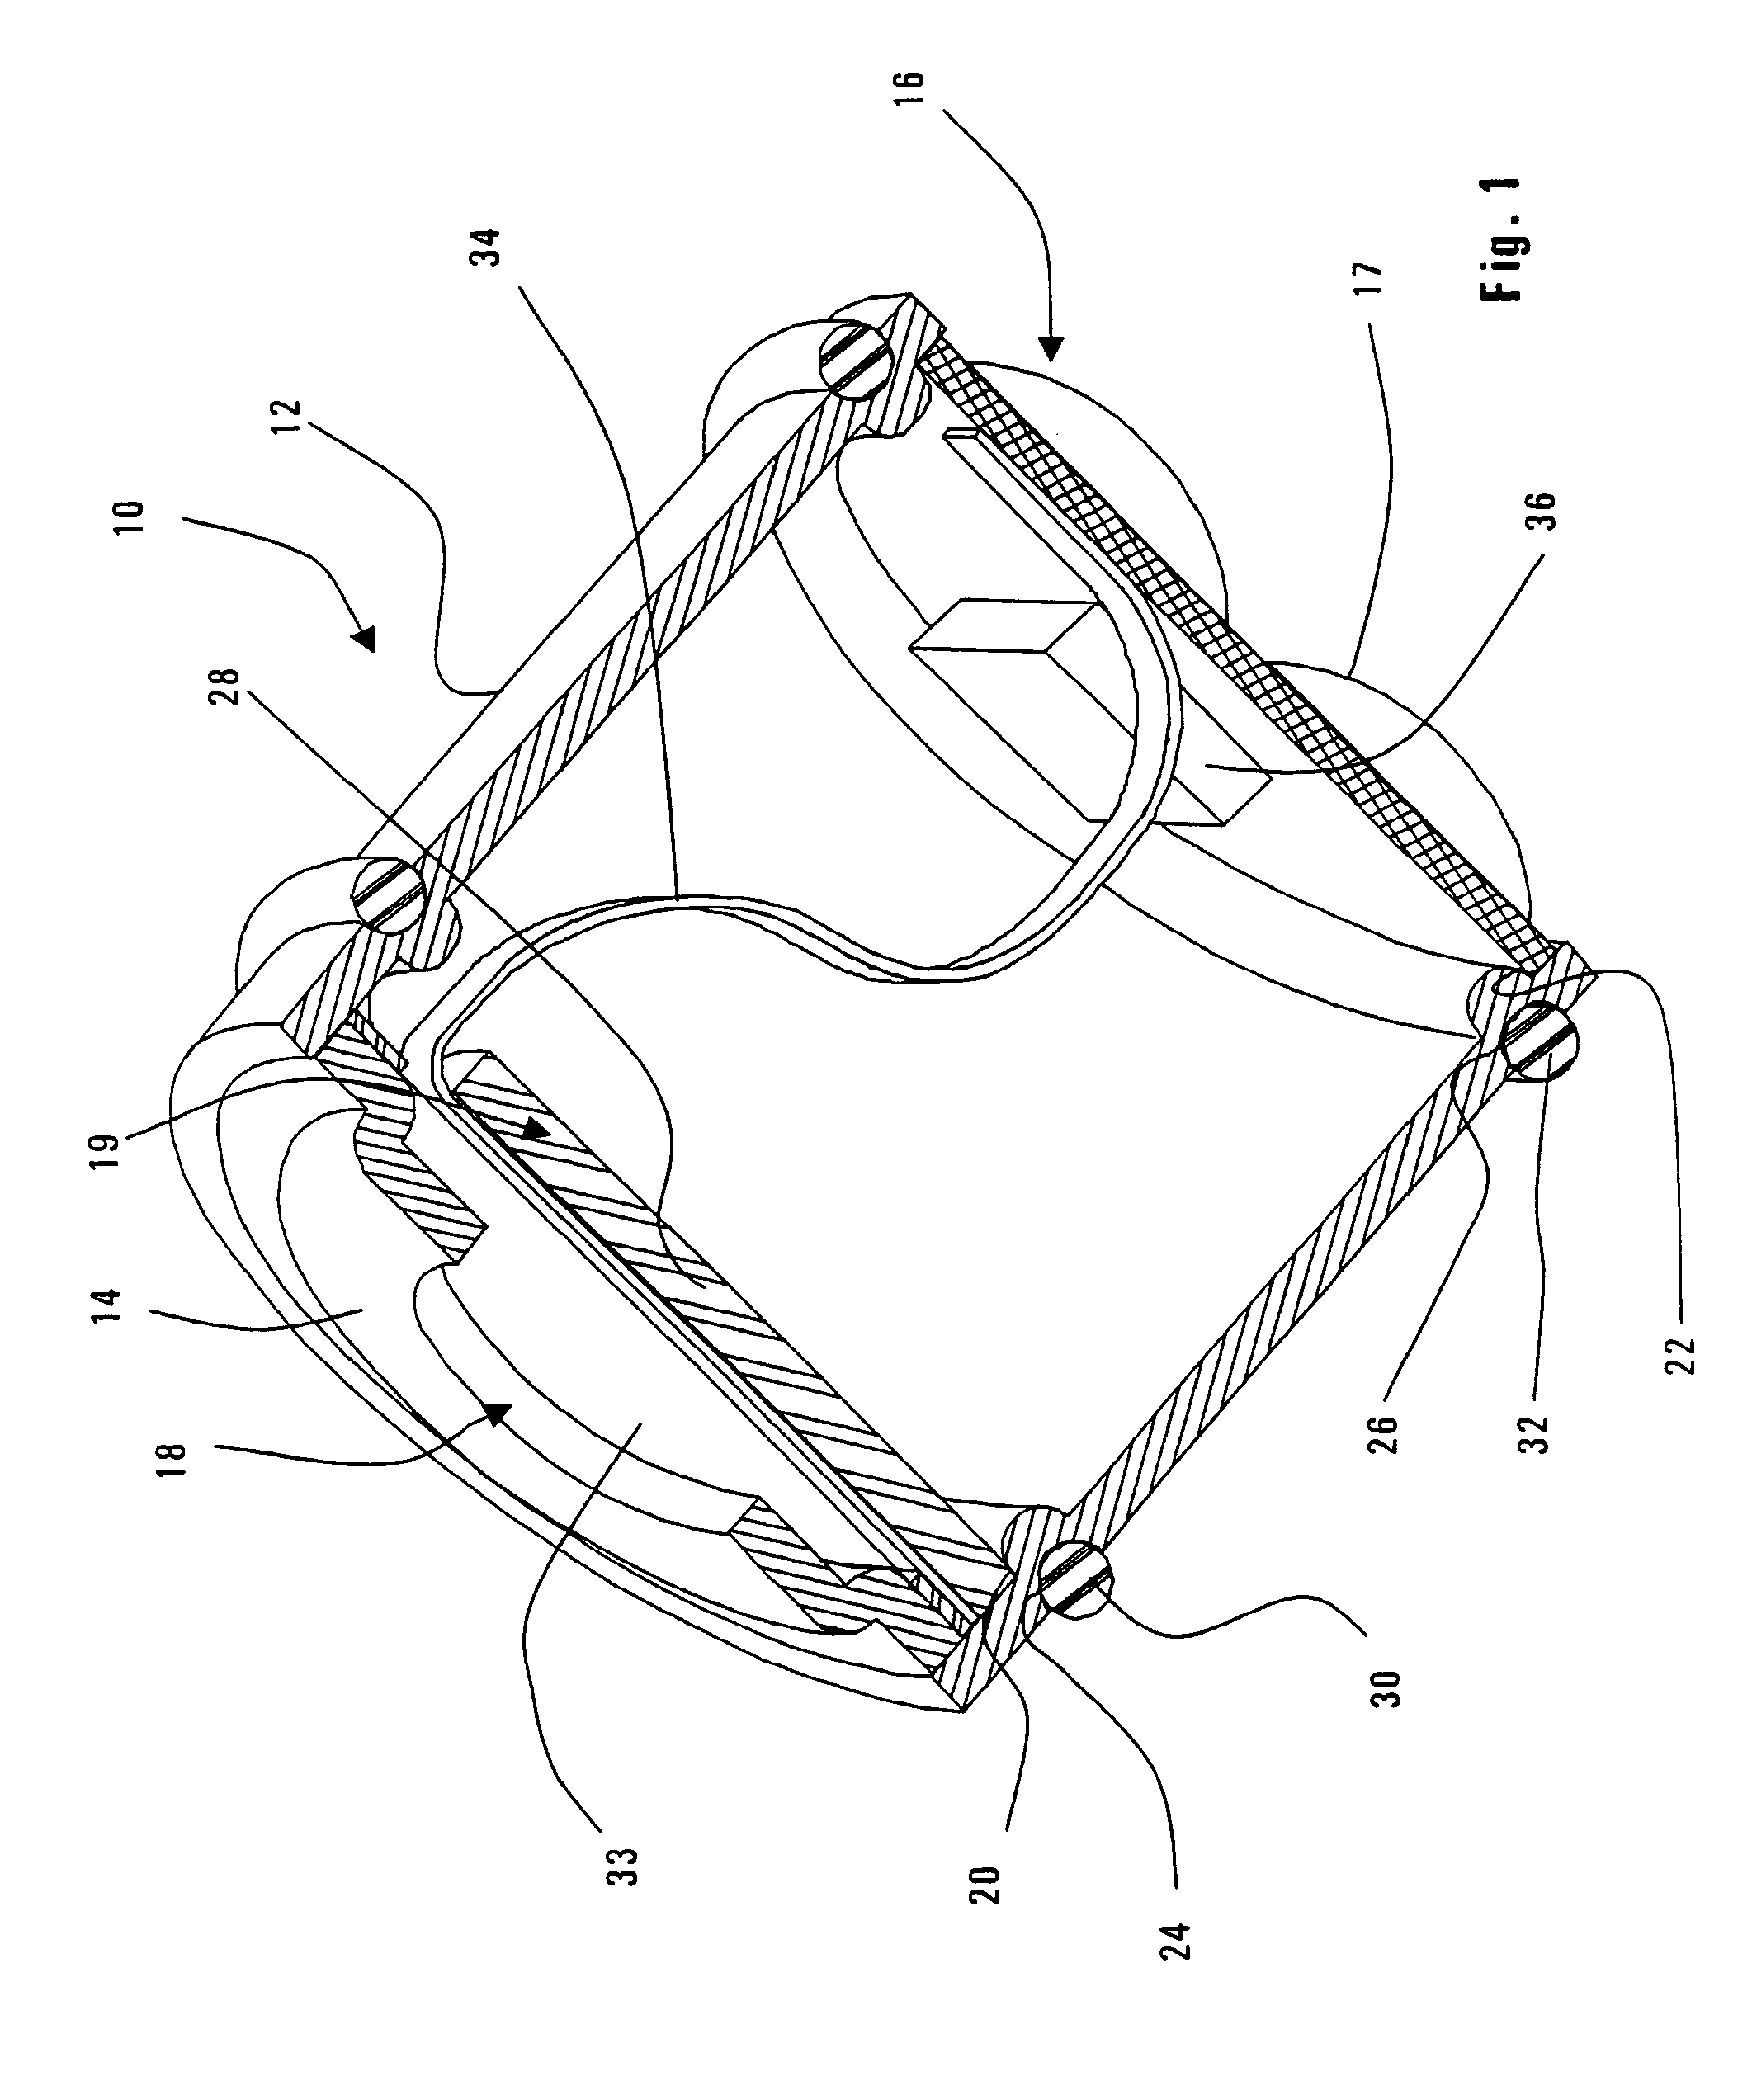 Electret assembly for a microphone having a backplate with improved charge stability